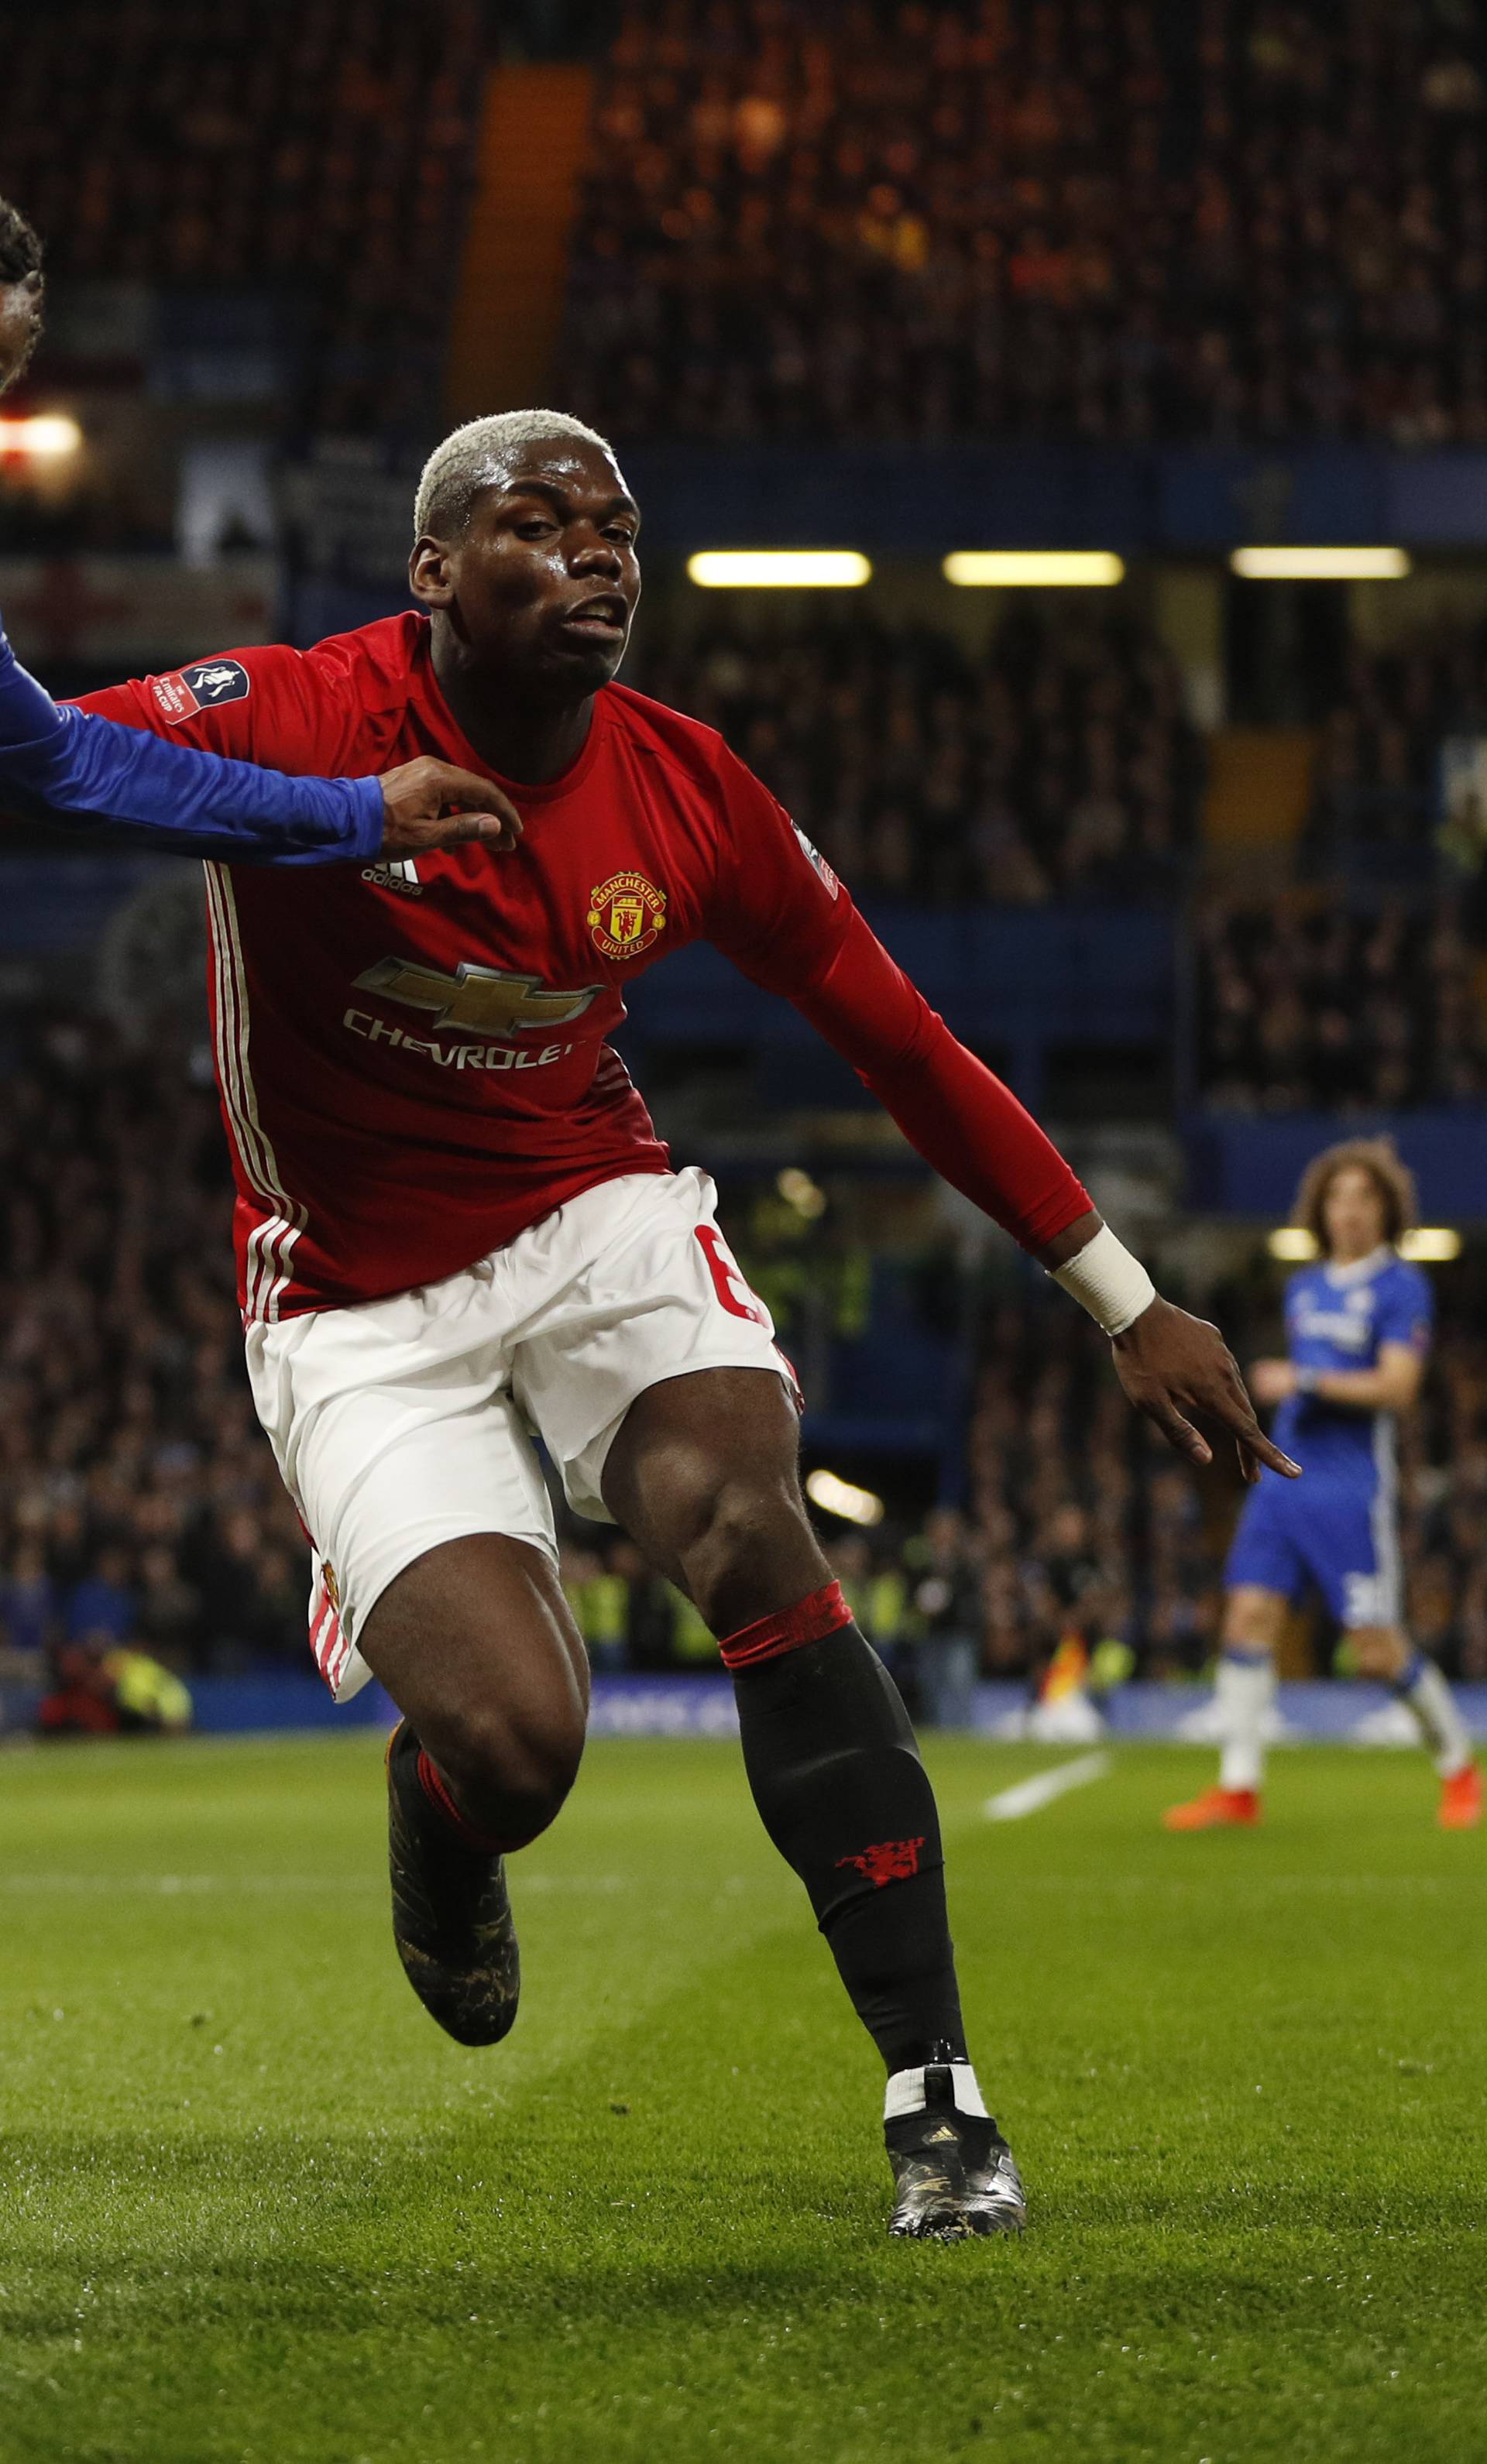 Manchester United's Paul Pogba in action with Chelsea's Willian